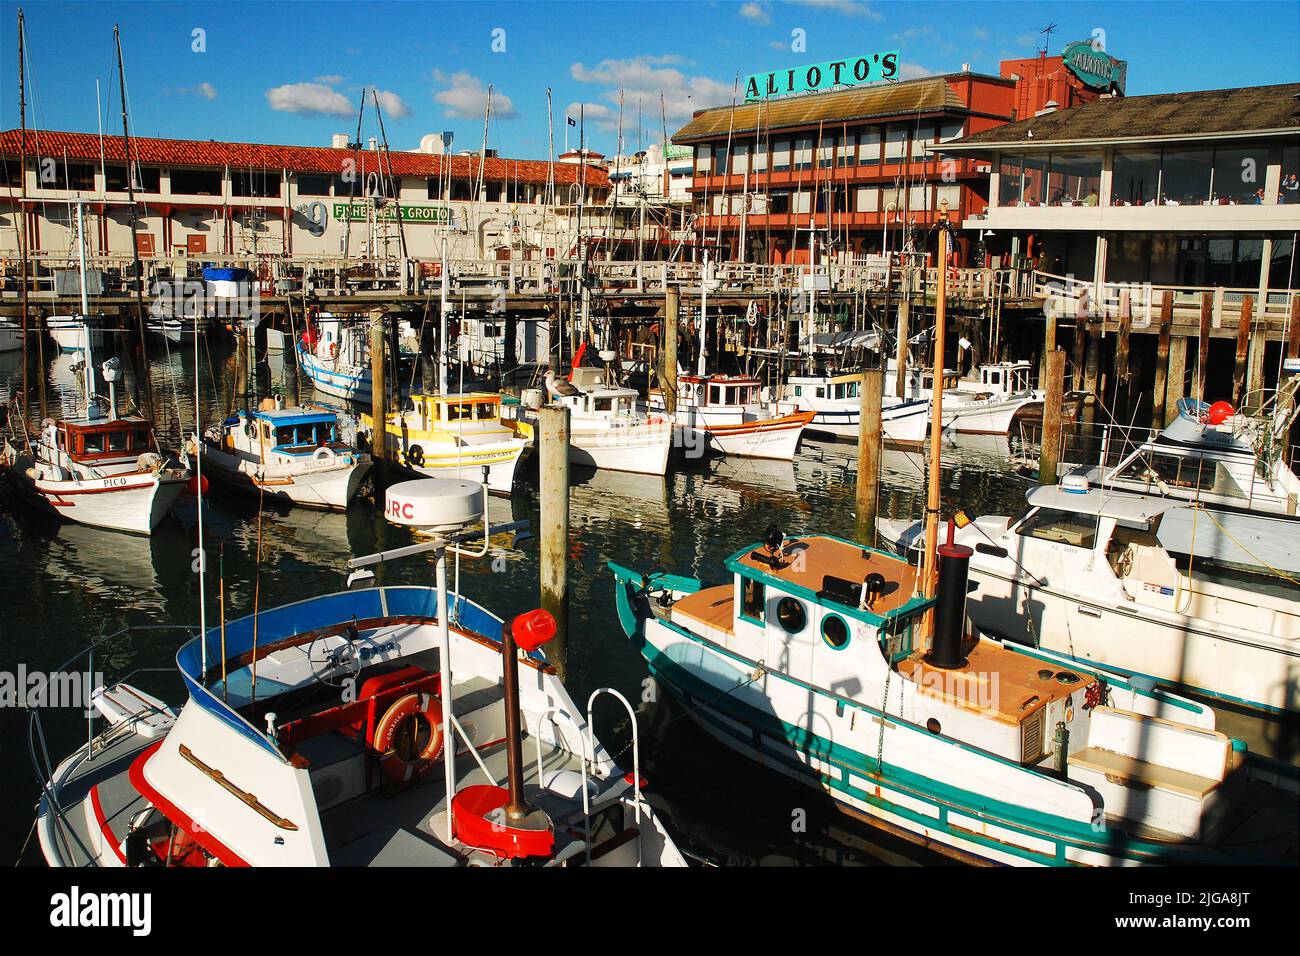 Working fishing boats and tour ships are docked in San Francisco's Fisherman's Wharf, a popular tourist attraction Stock Photo